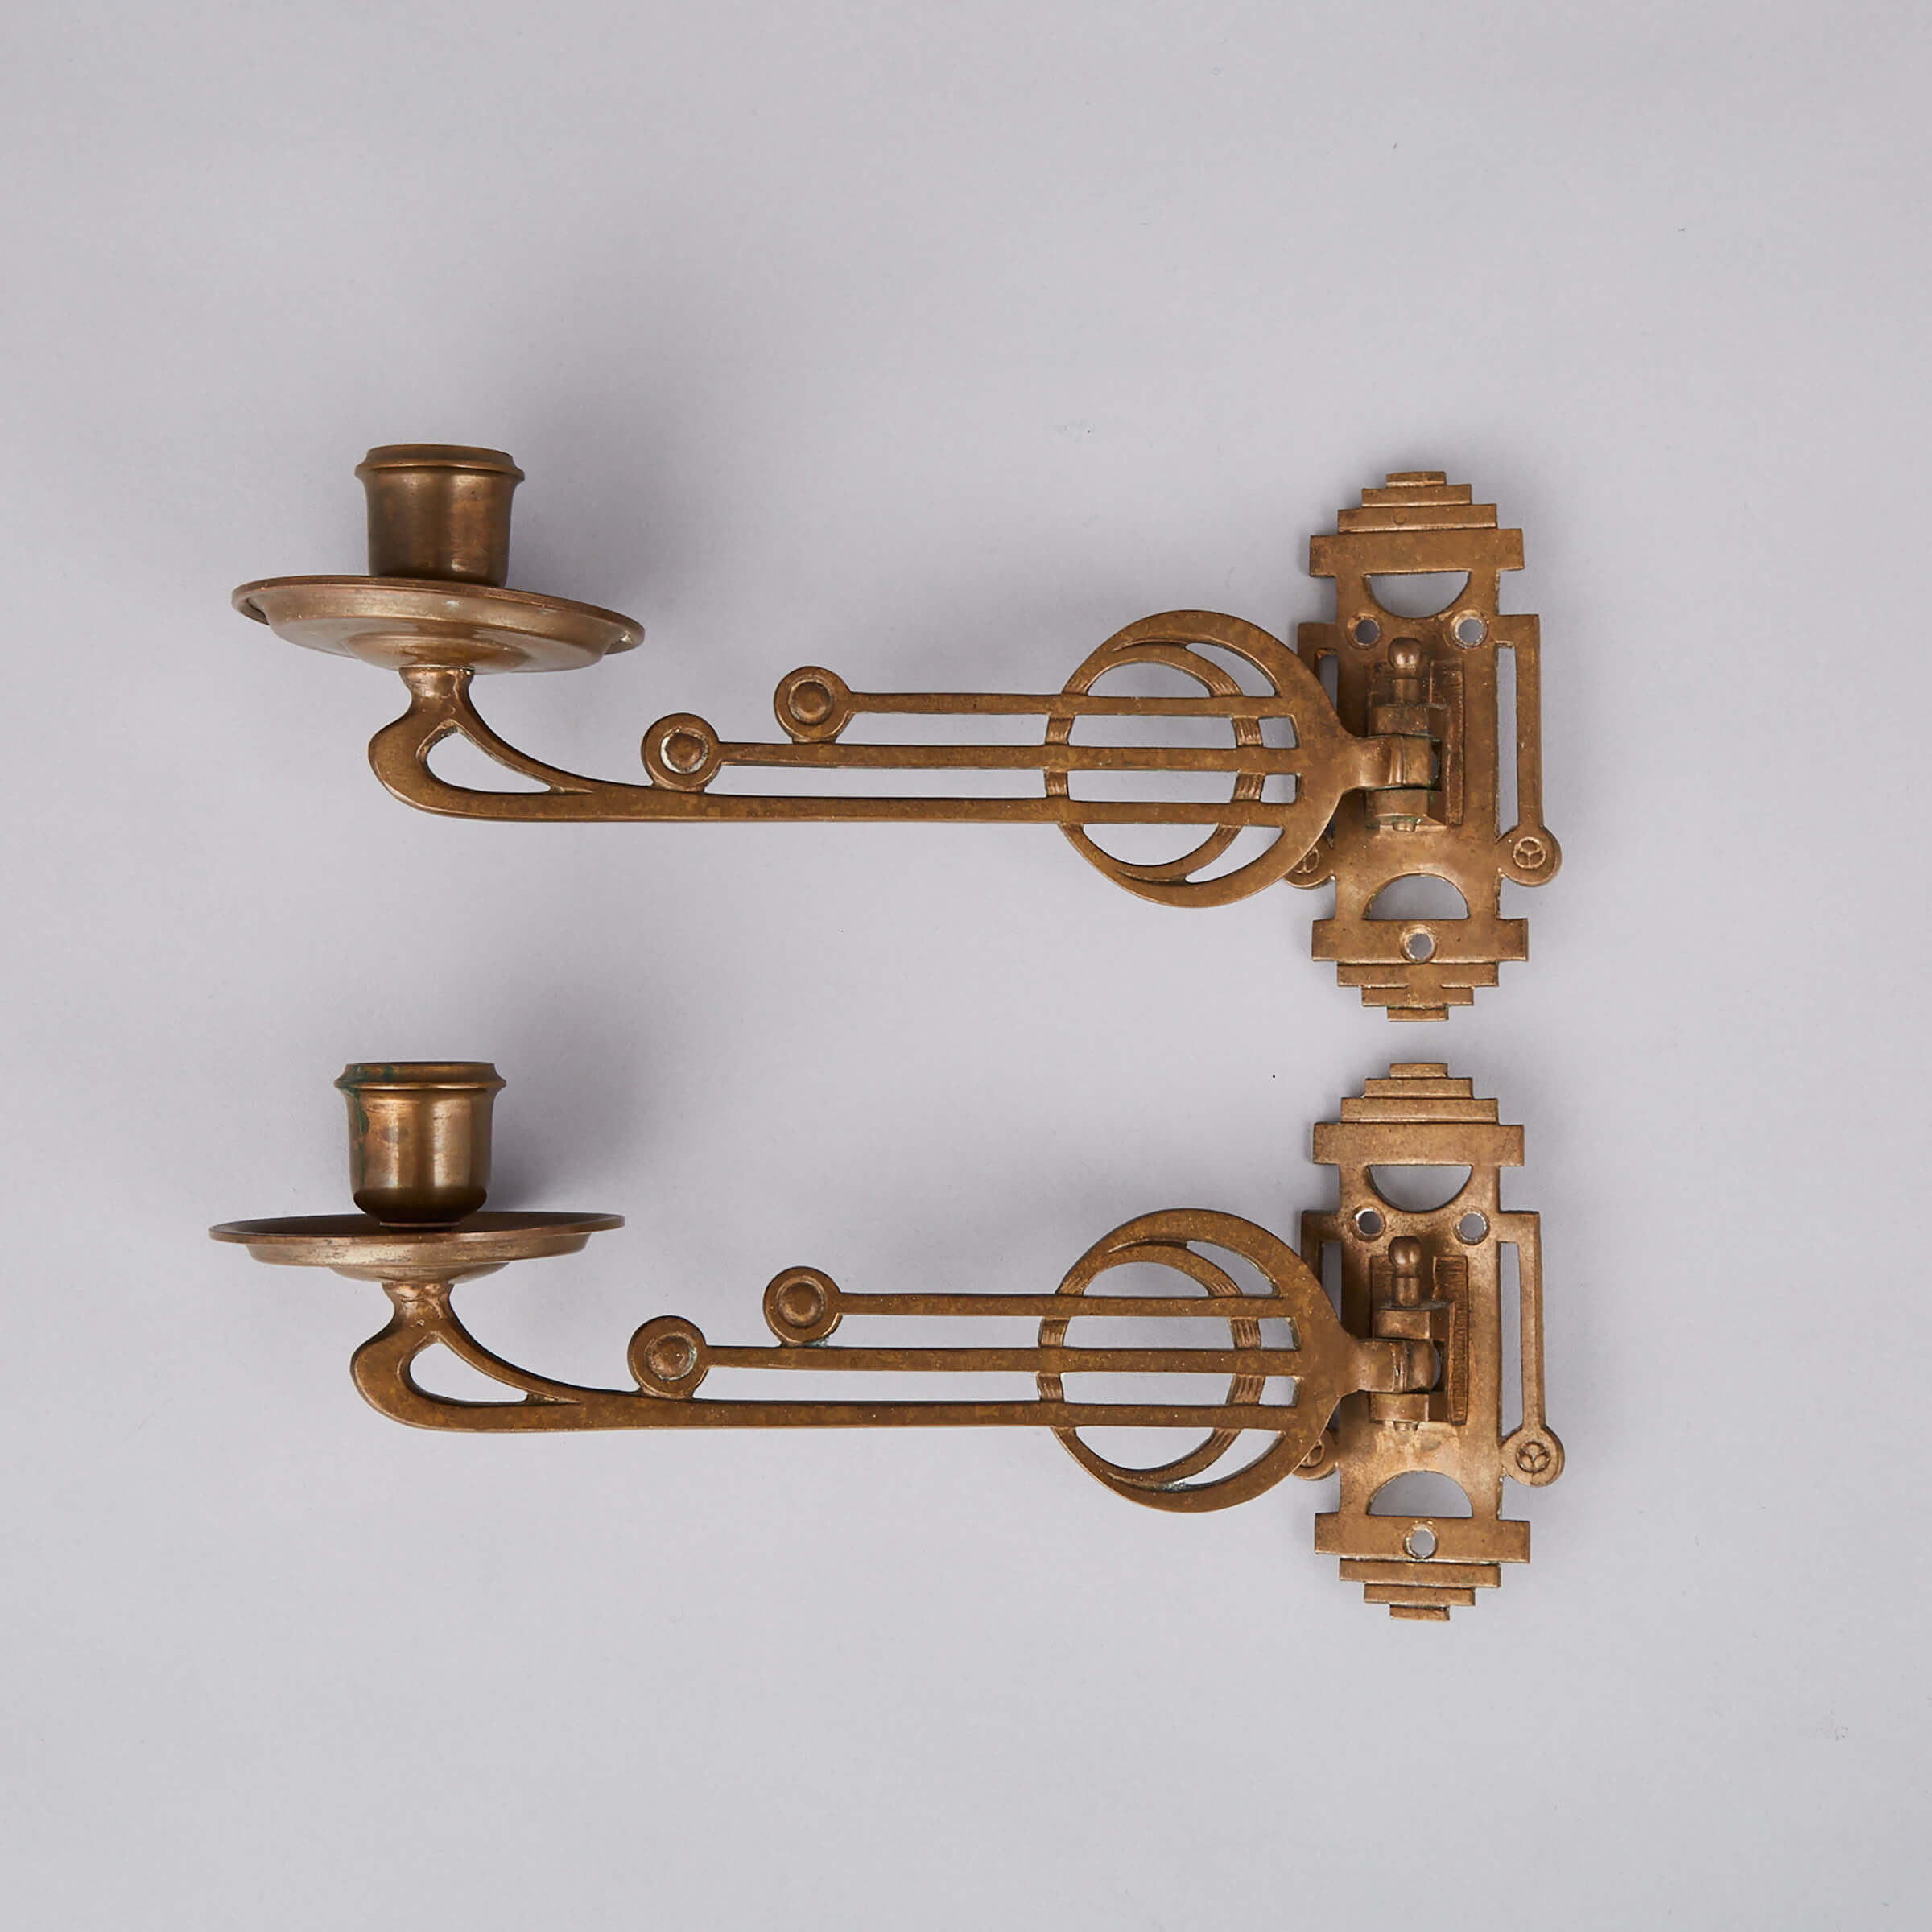 Pair of Austrian Secessionist Brass Sconces, early 19th century